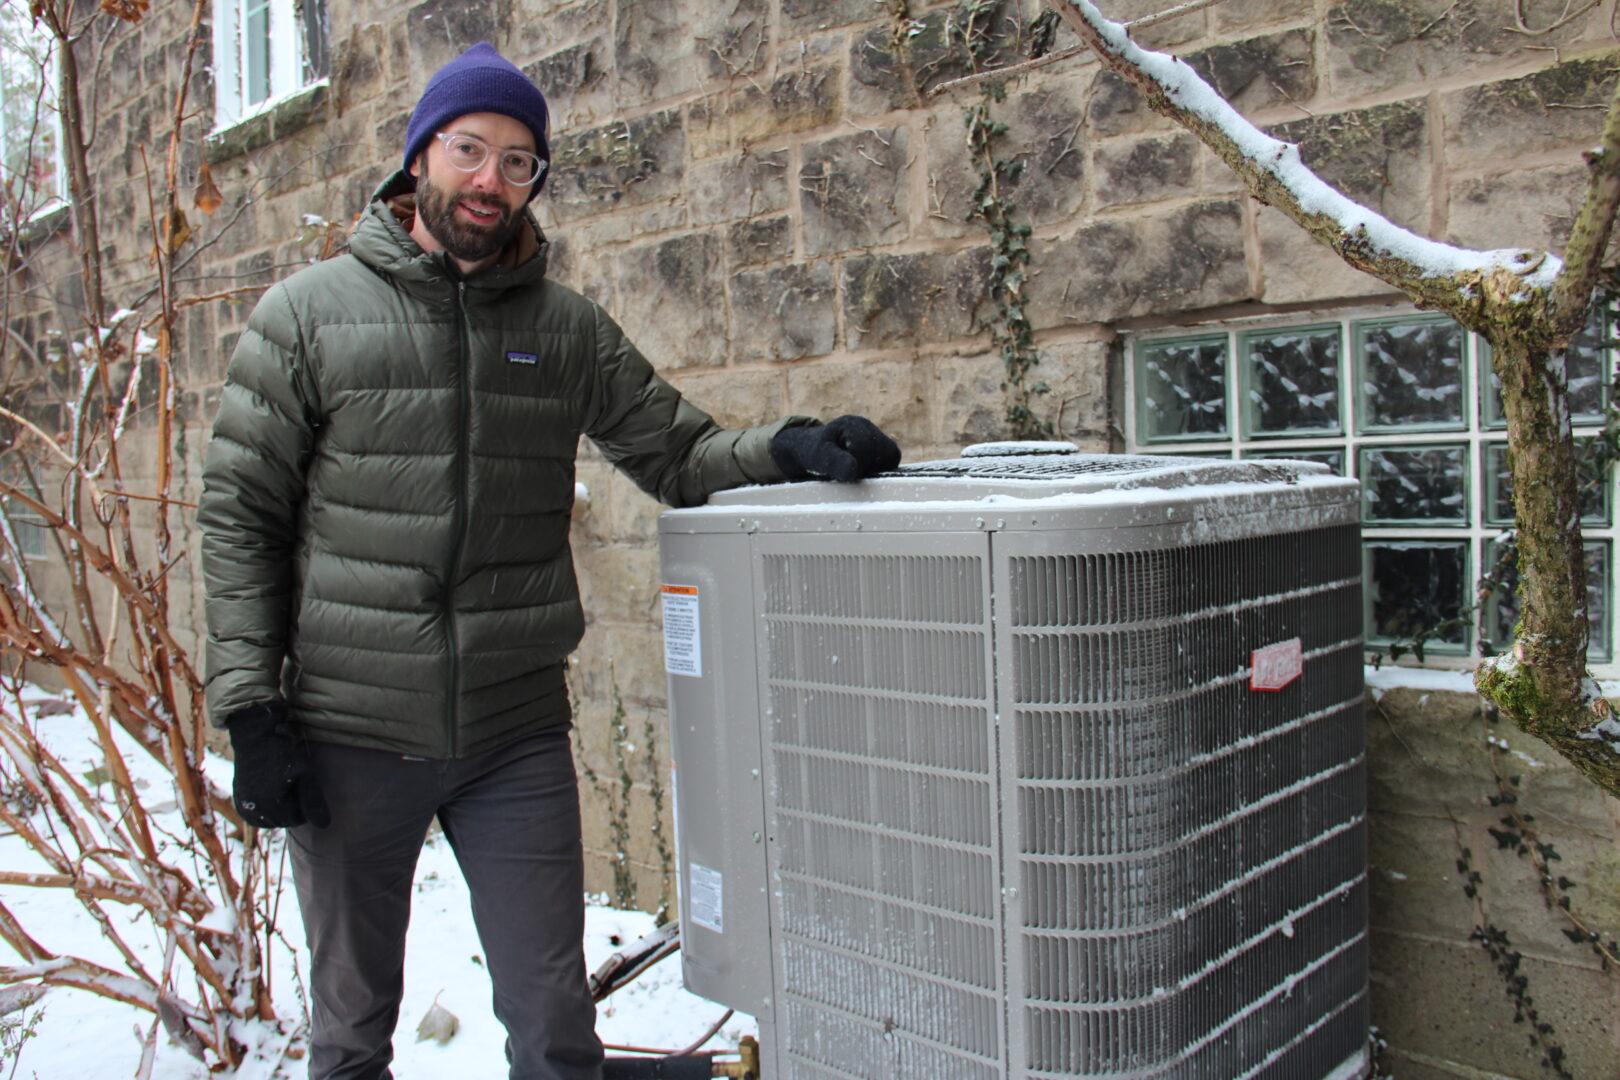 In Pa., heat pumps could be a climate change solution. But contractors and  customers would need to buy in